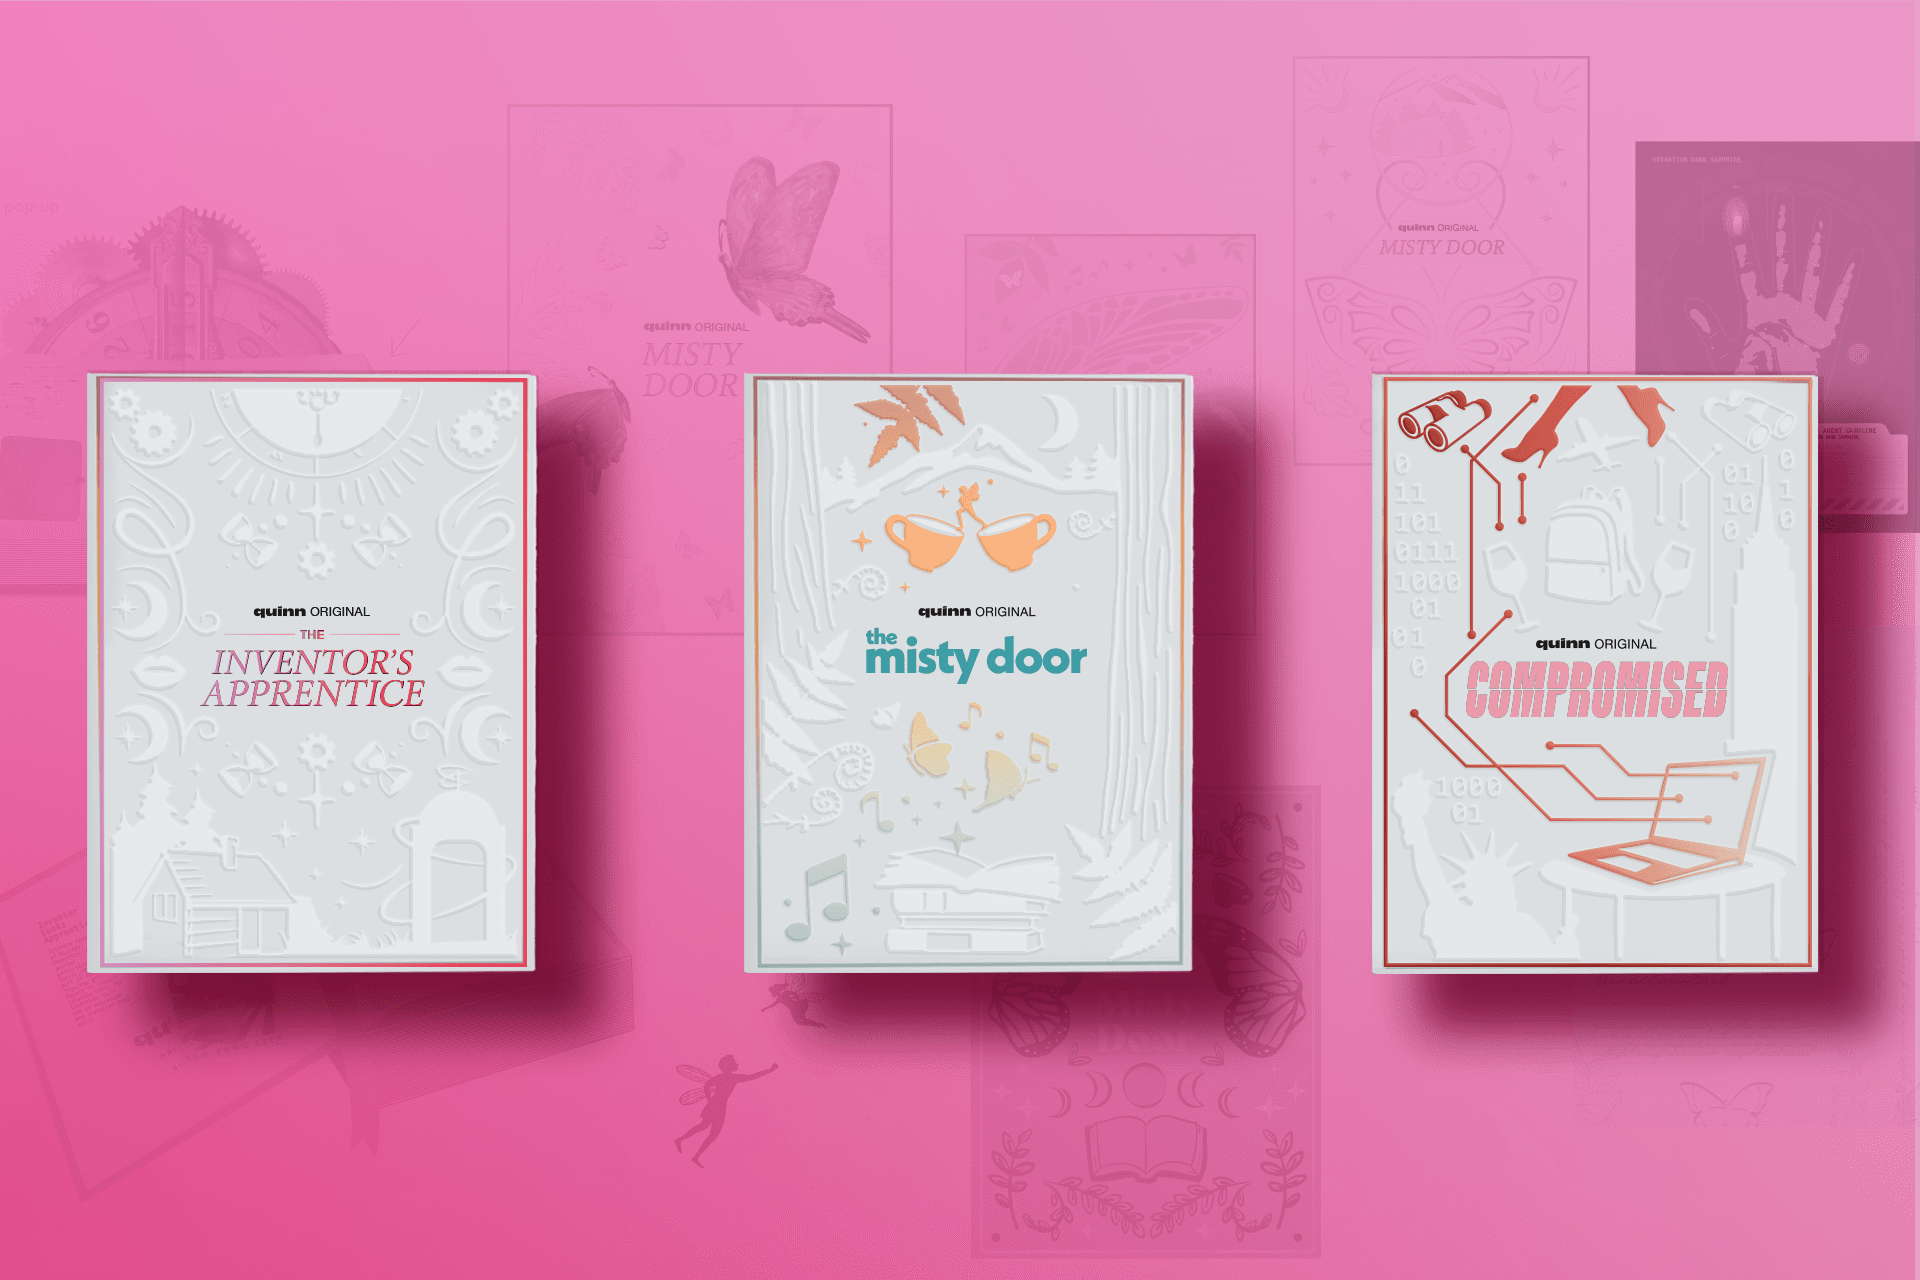 Final designs for a set of Influencer Unboxing Experiences for Misty Door, The Inventor's Apprentince and Compromised, a series of Quinn Original audiobooks.